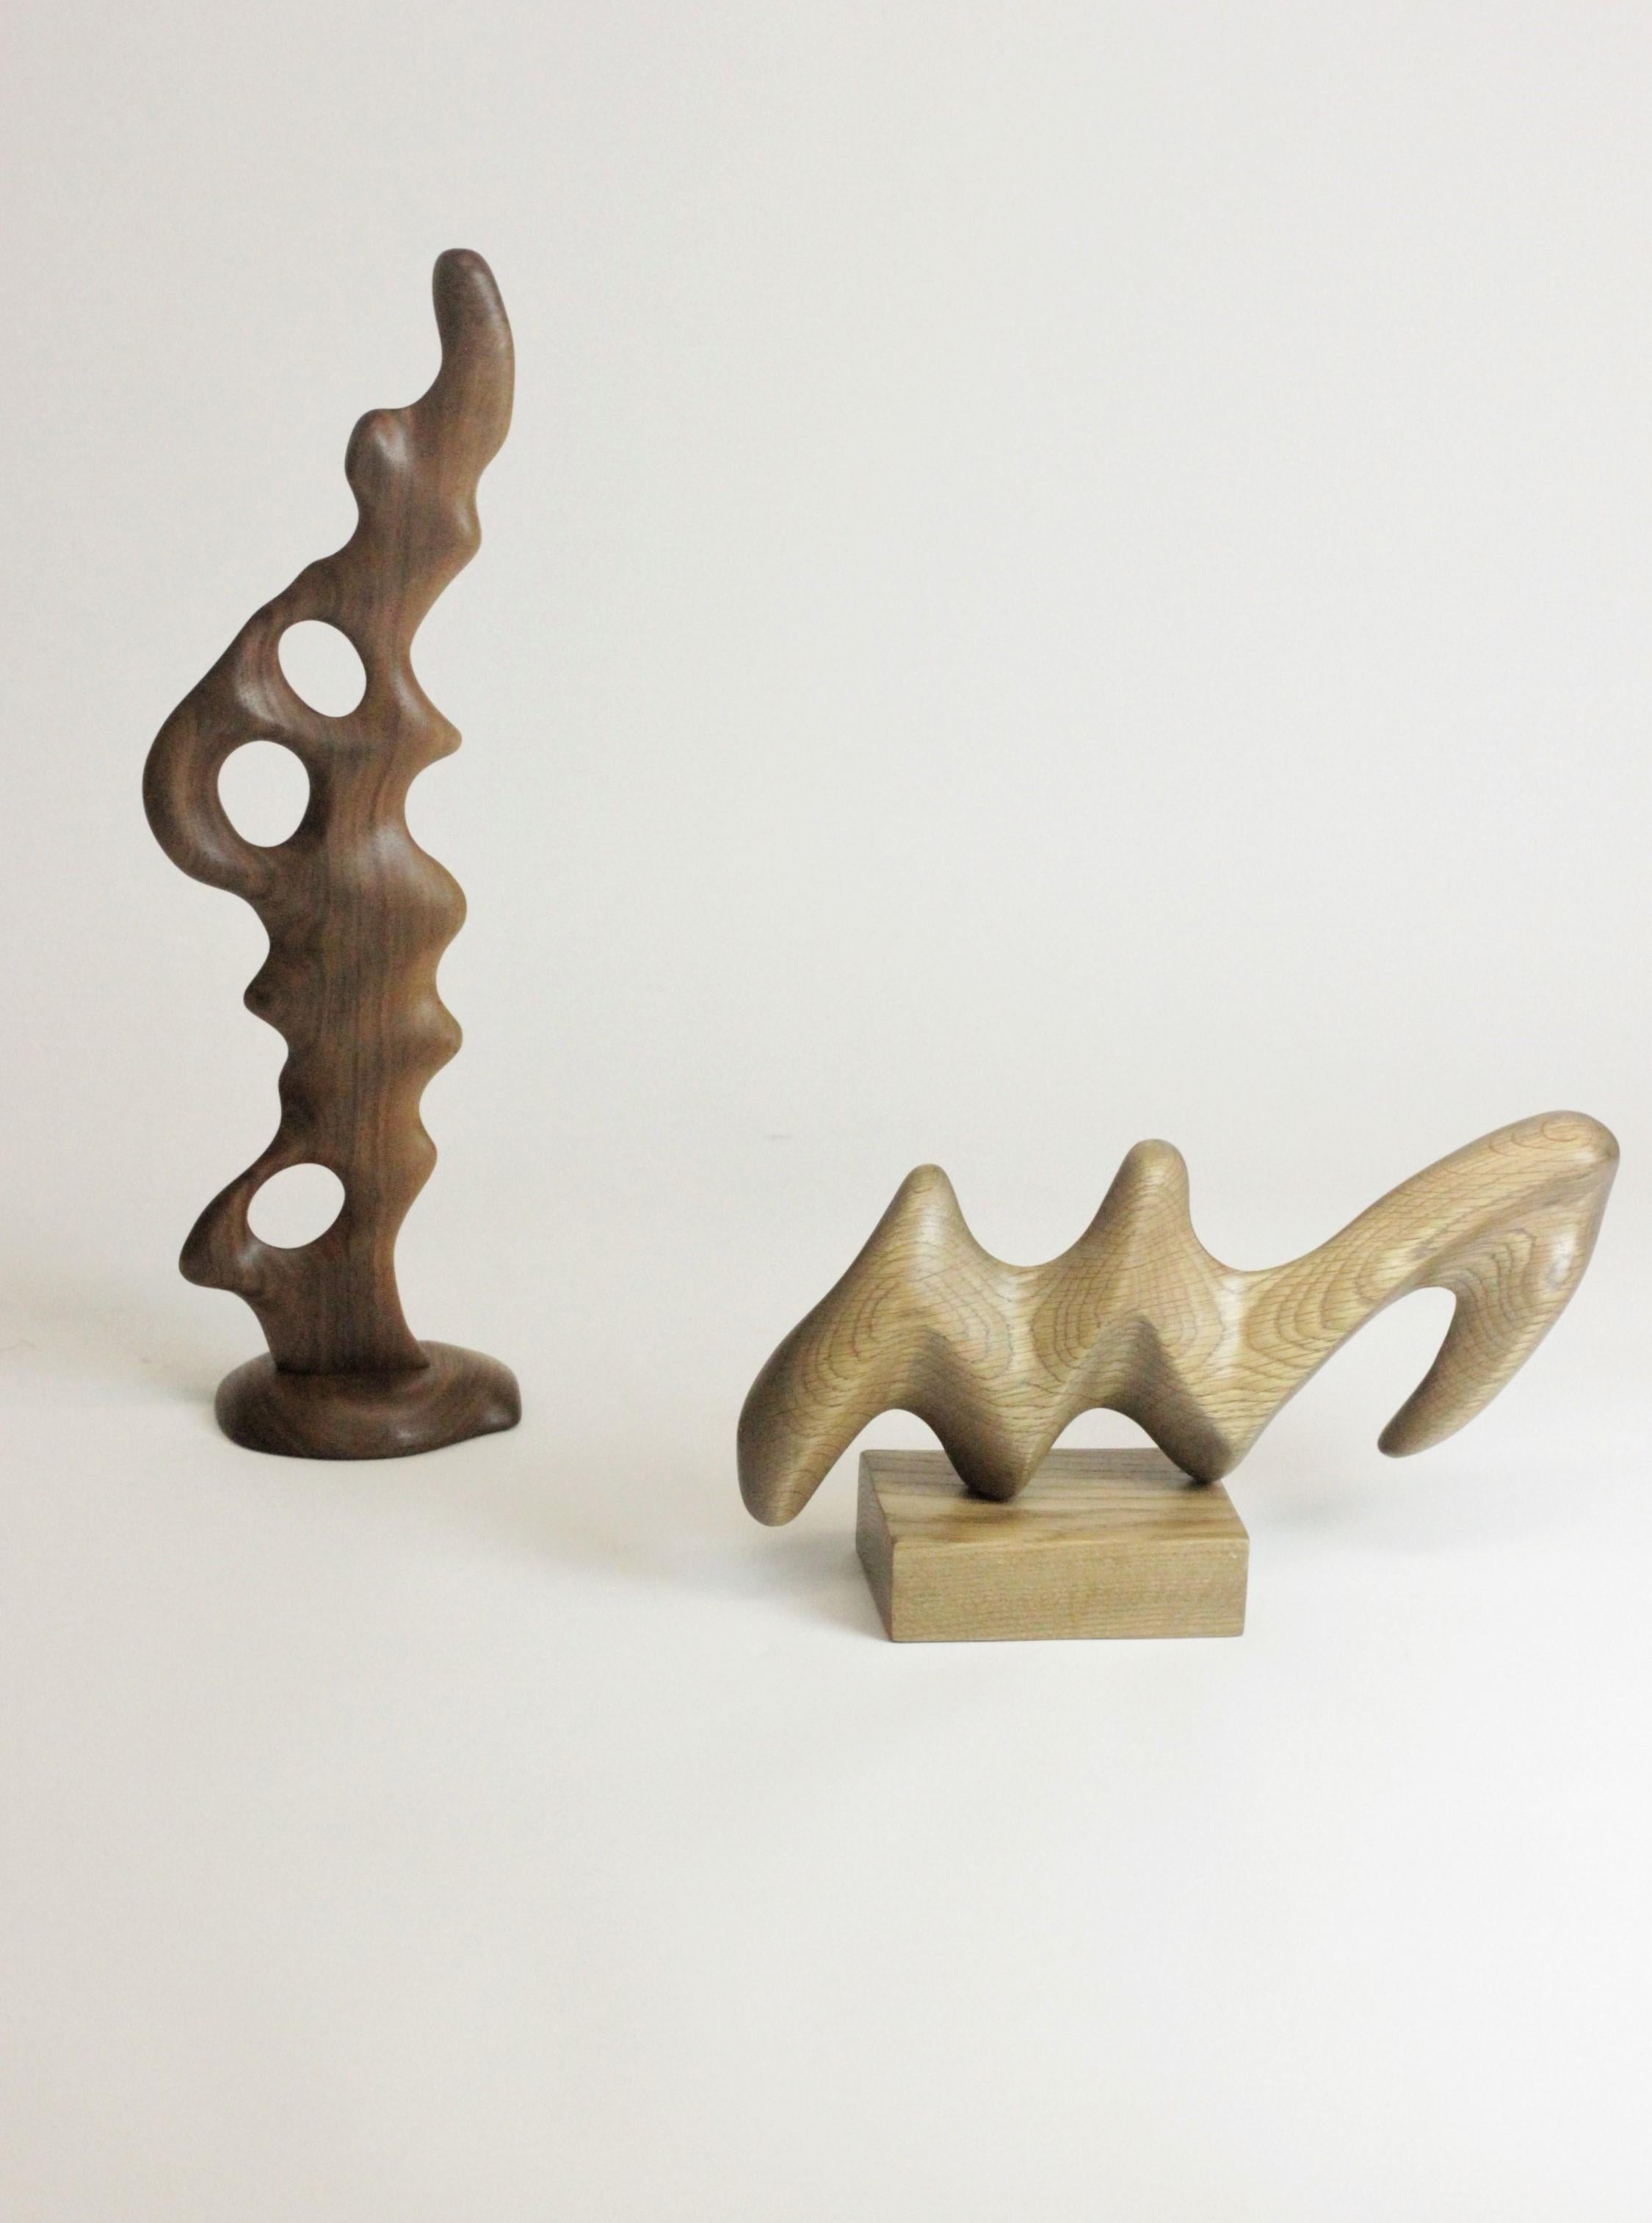 Hand Carved Biomorphic Wooden Sculpture II For Sale 2